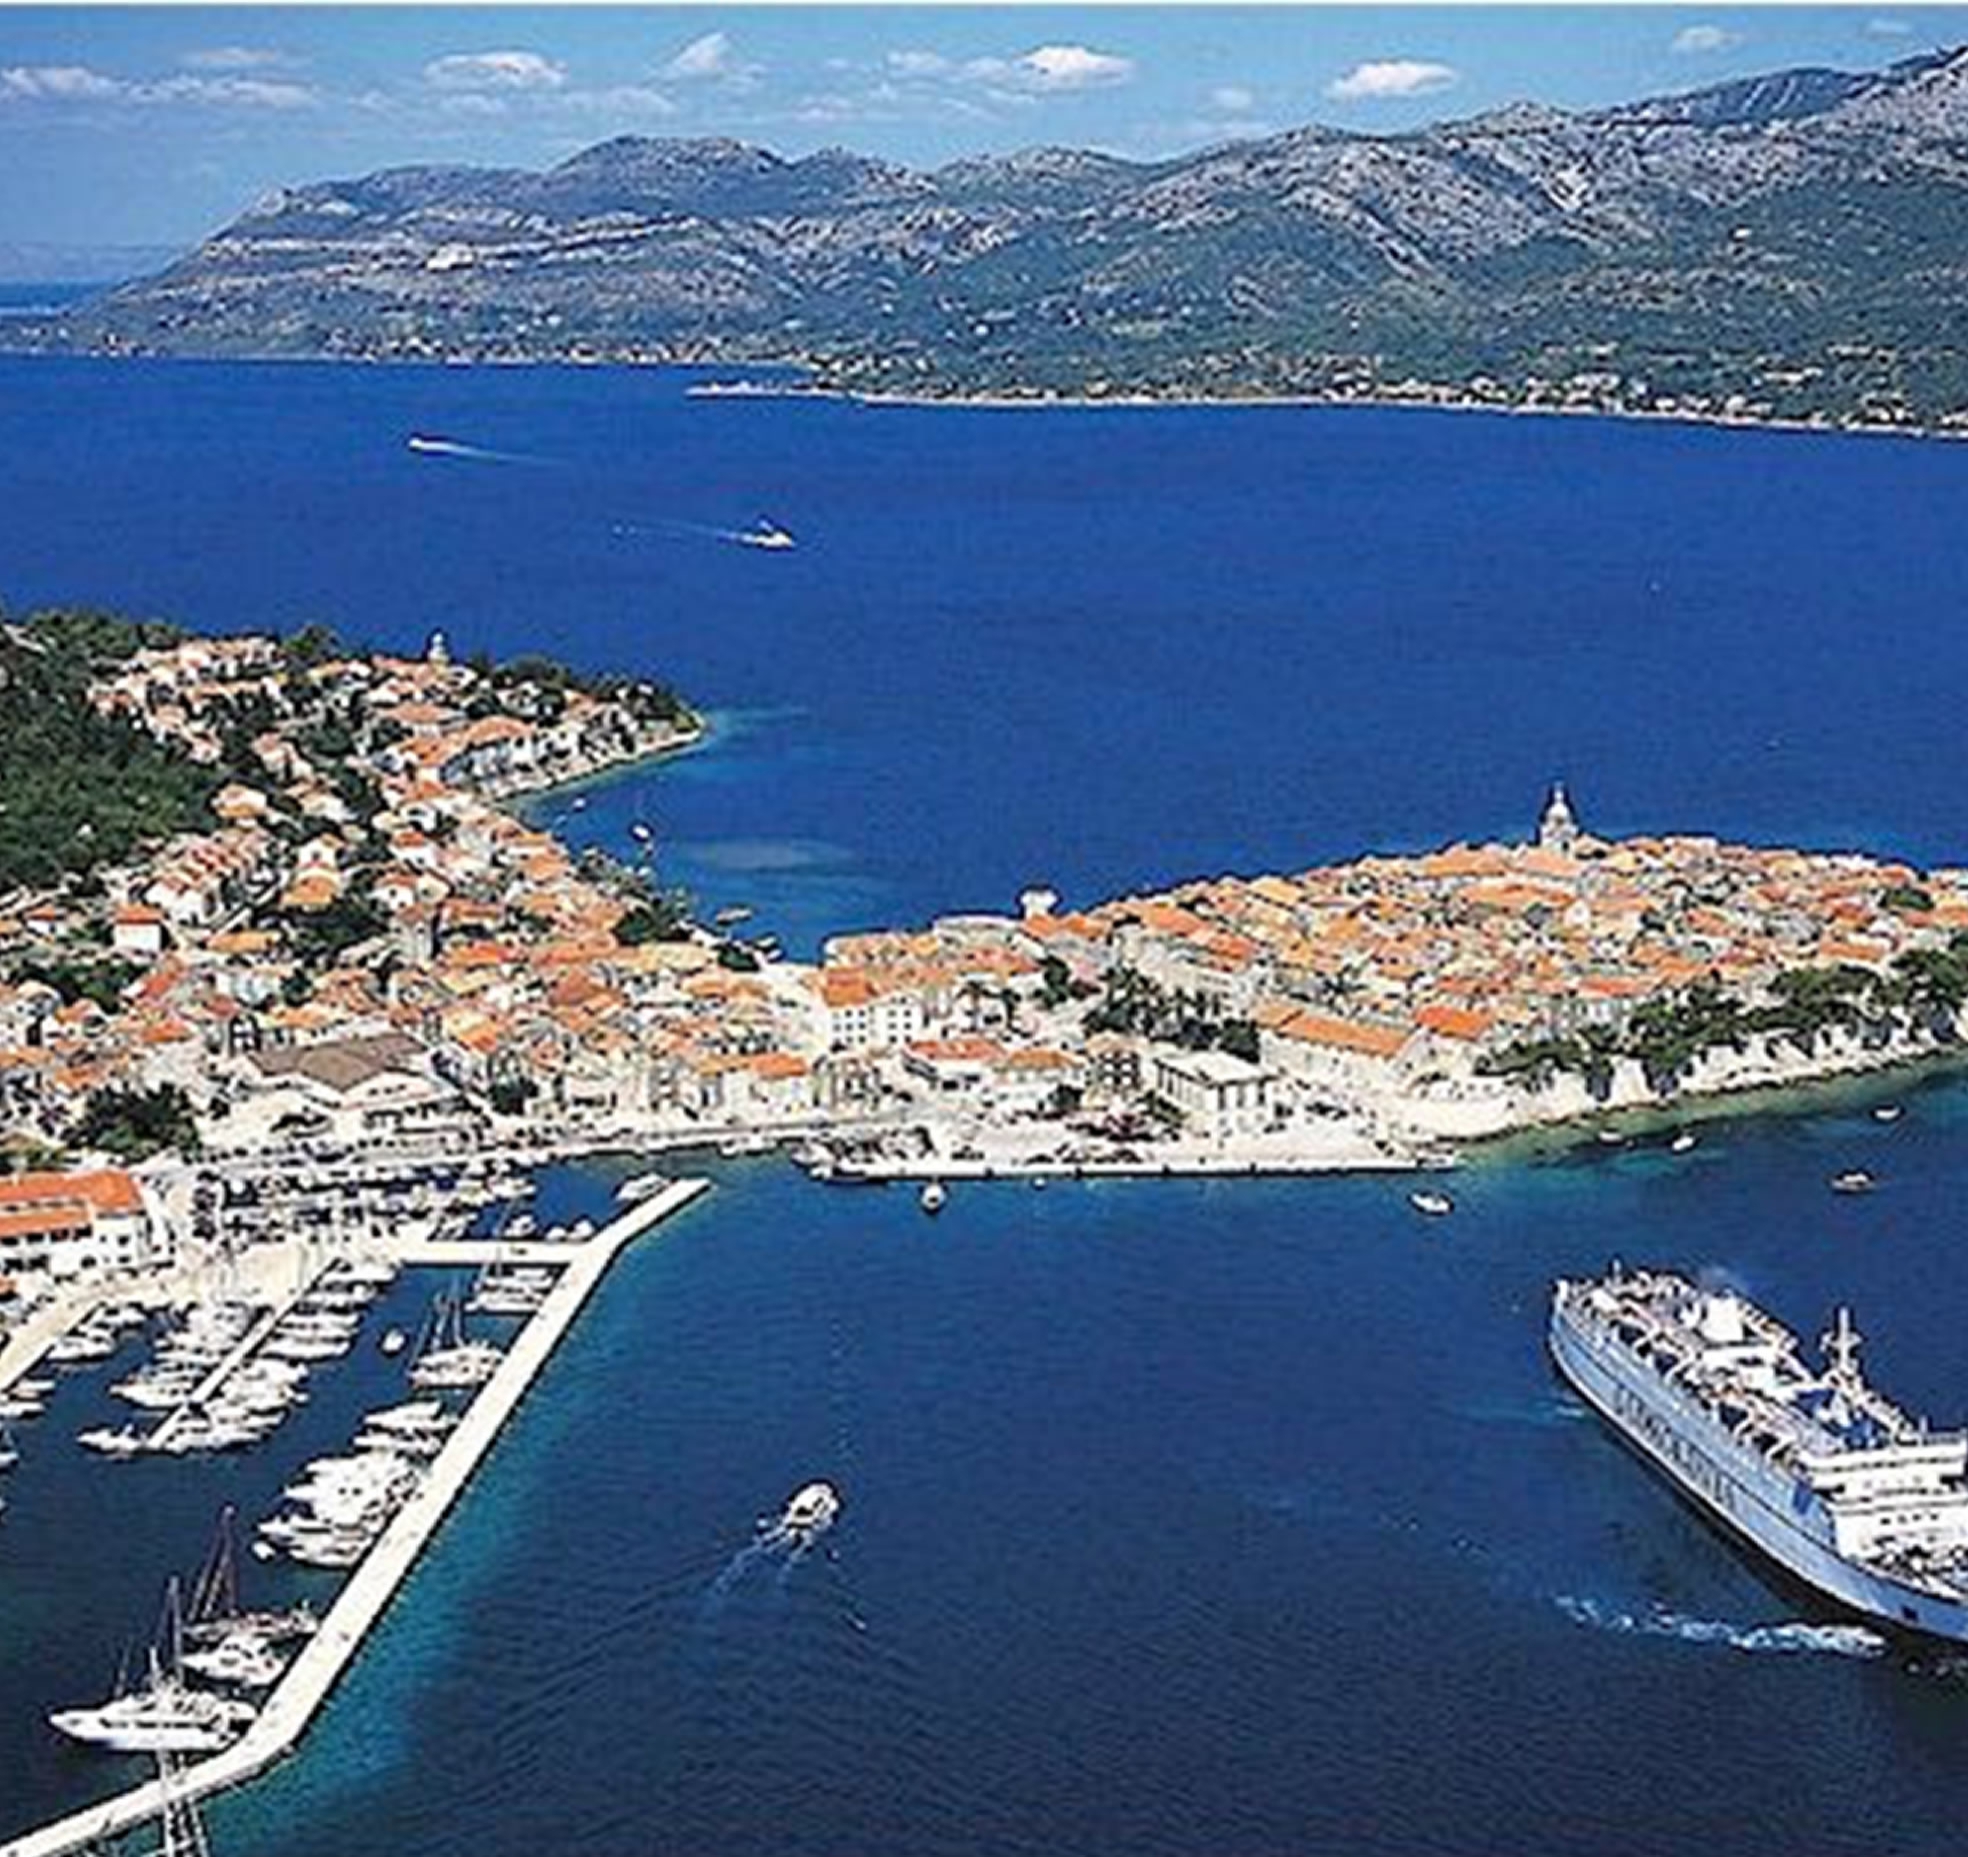 Multitenant business spaces in the City of Korcula